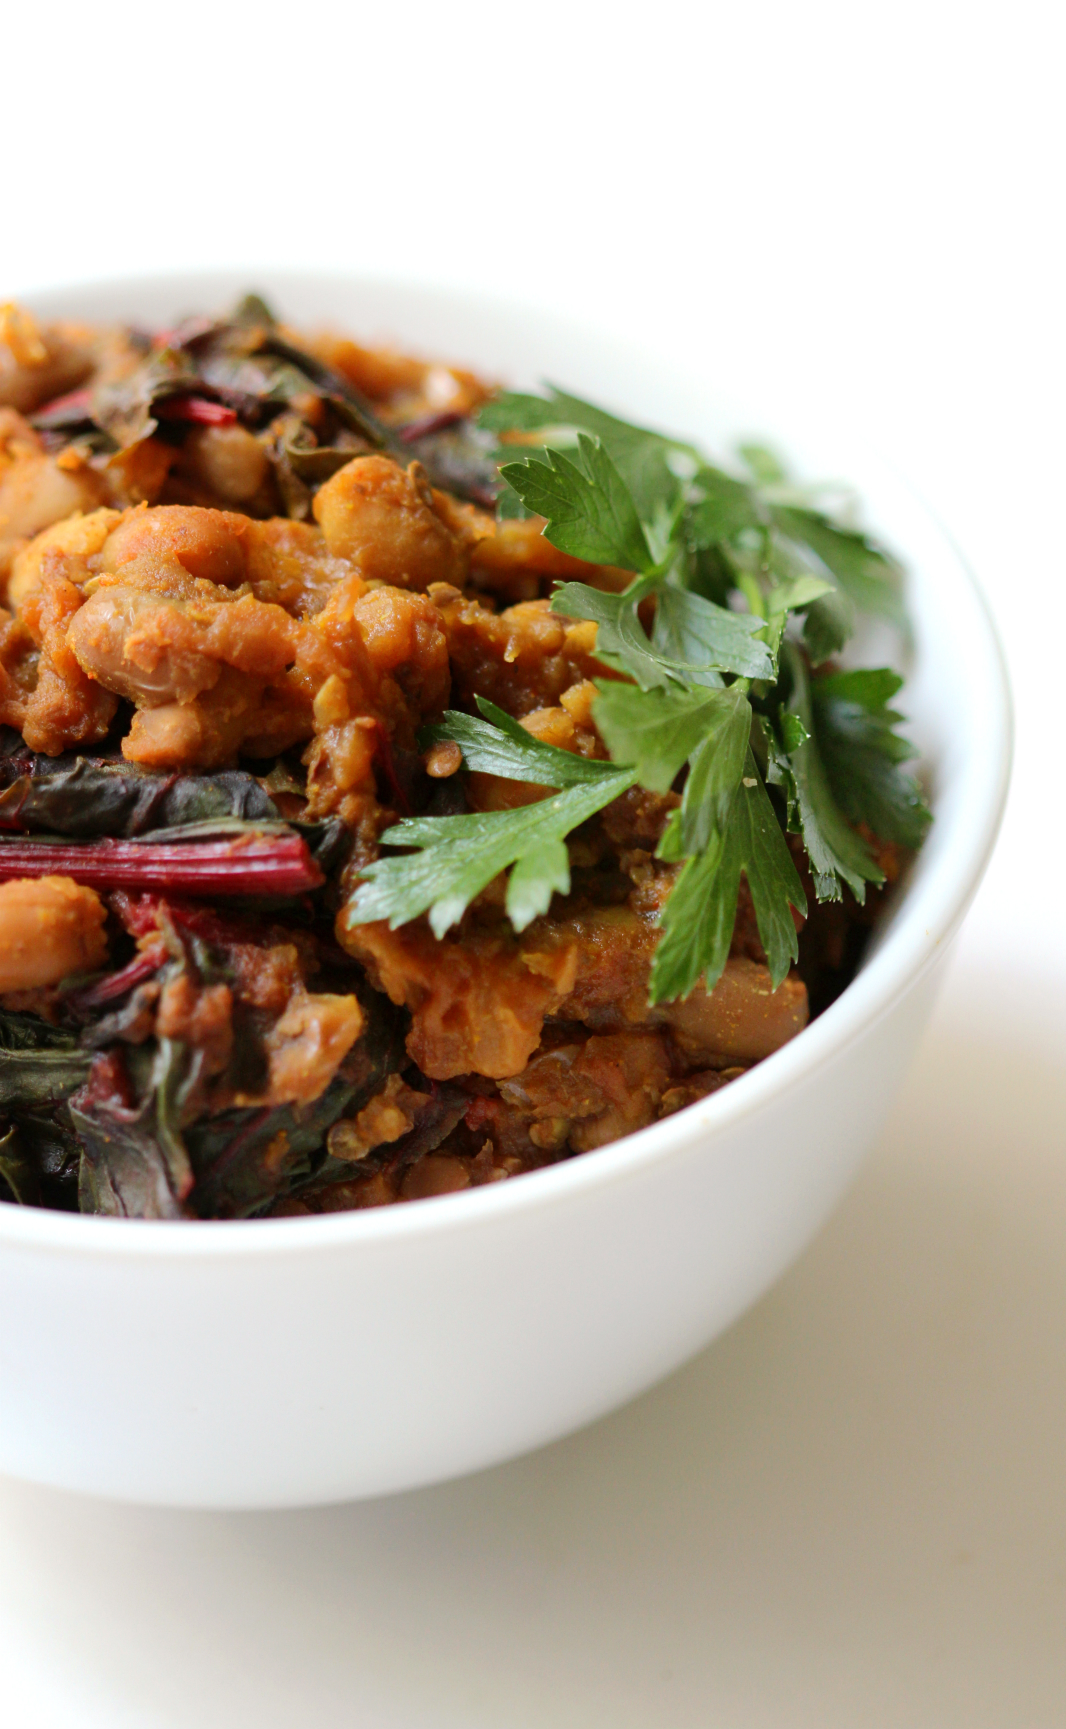 Black Eyed Pea Curry with Swiss Chard & Roasted Eggplant | Strength and Sunshine @RebeccaGF666 An easy quick curry for a warming meal any night of the week. Black Eyed Pea Curry with Swiss Chard & Roasted Eggplant is packed with creamy veggie power to satisfy even this biggest plant-based skeptic! A perfect gluten-free, vegan, meatless dinner recipe.